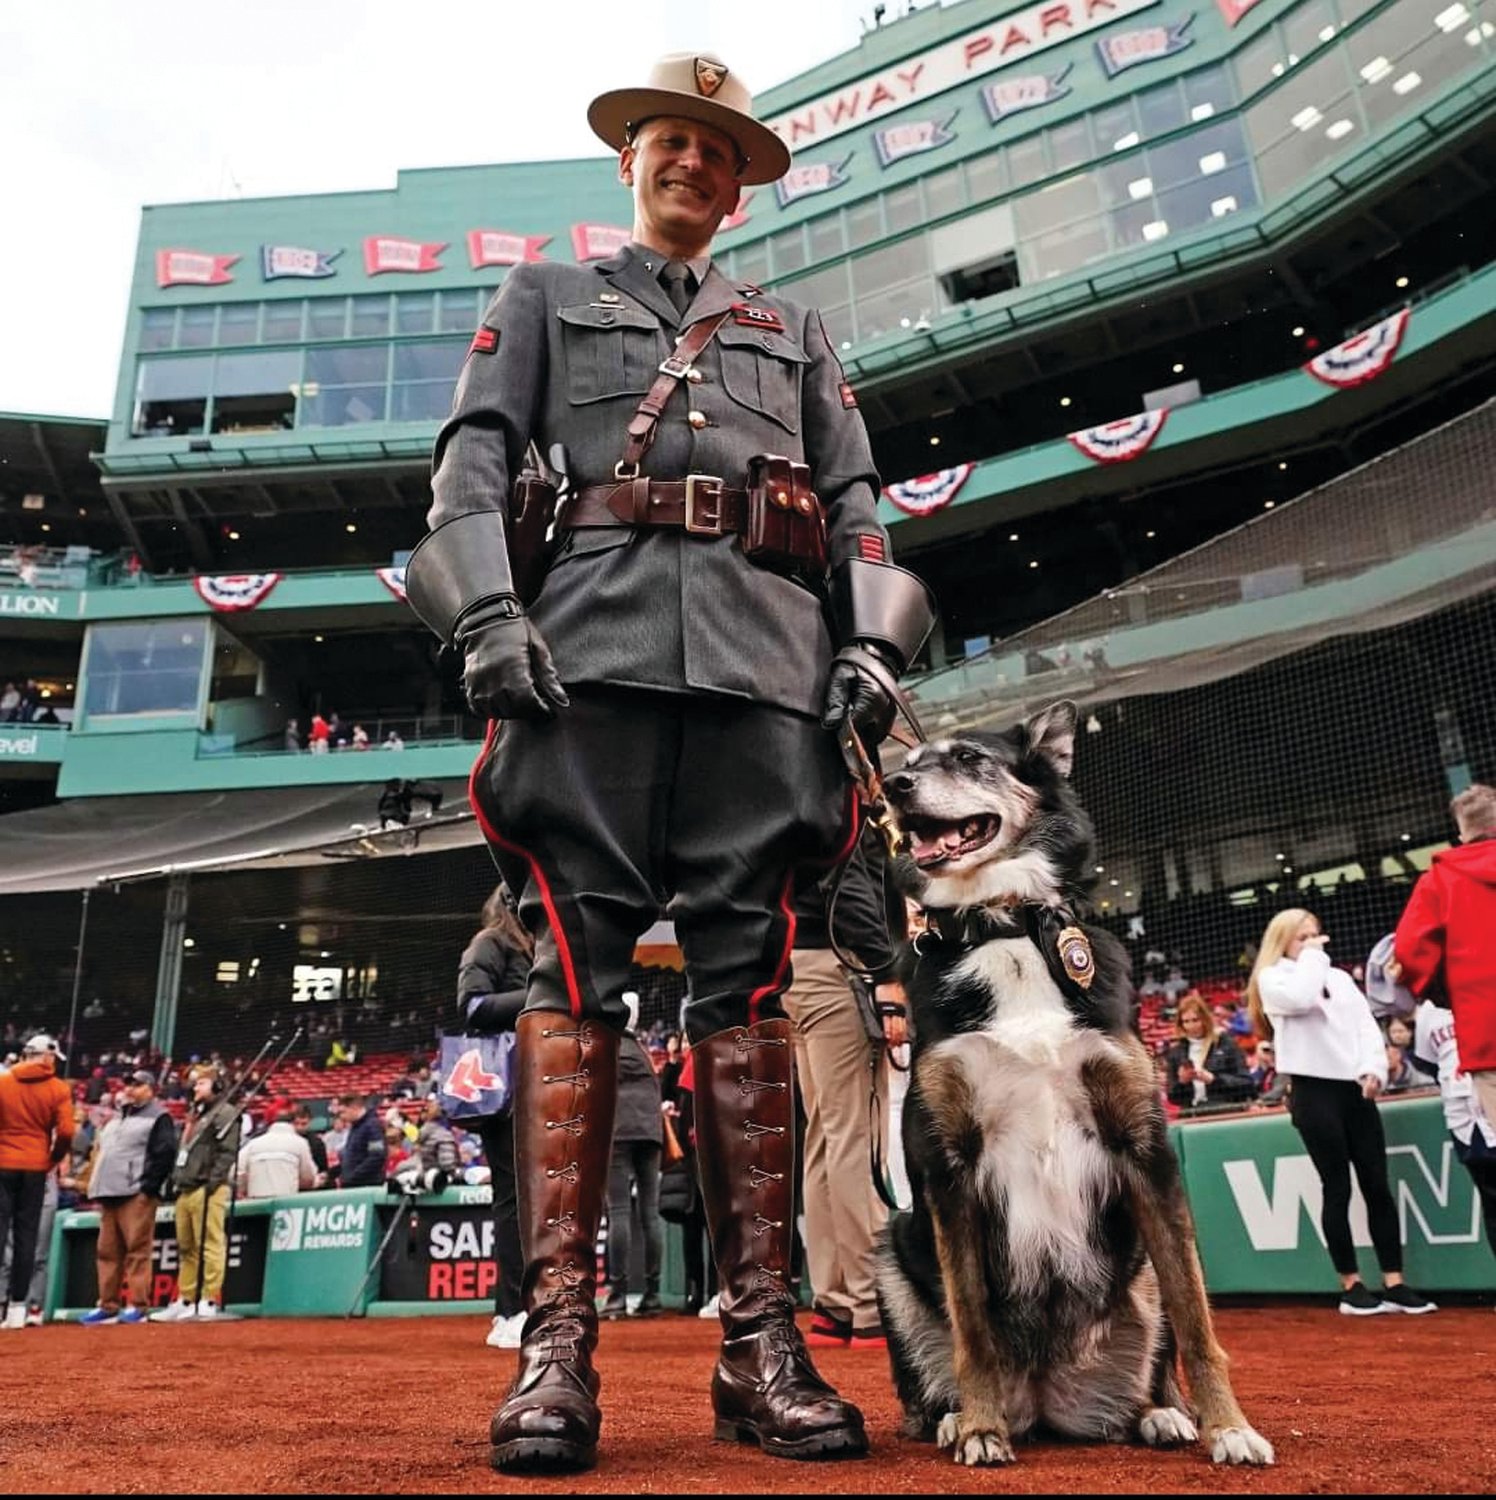 REMARKABLE RESCUE: Ruby and her handler Corporal Daniel O’Neil worked out of the Scituate State Police barracks, and served together since 2011. They recently visited Fenway Park in Boston, Massachusetts.